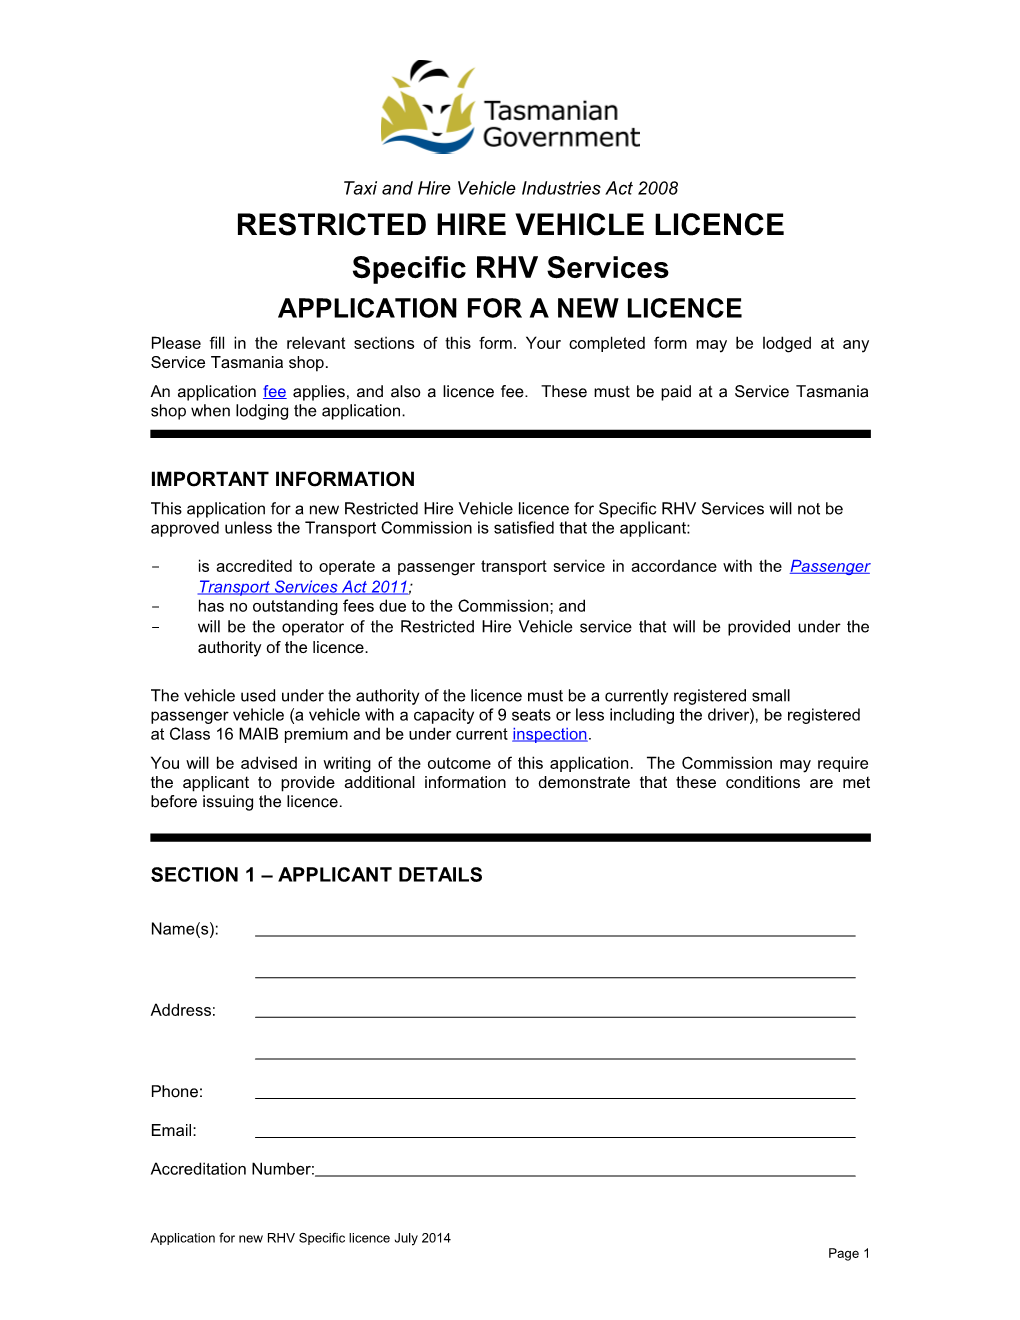 Restricted Hire Vehicle Licence